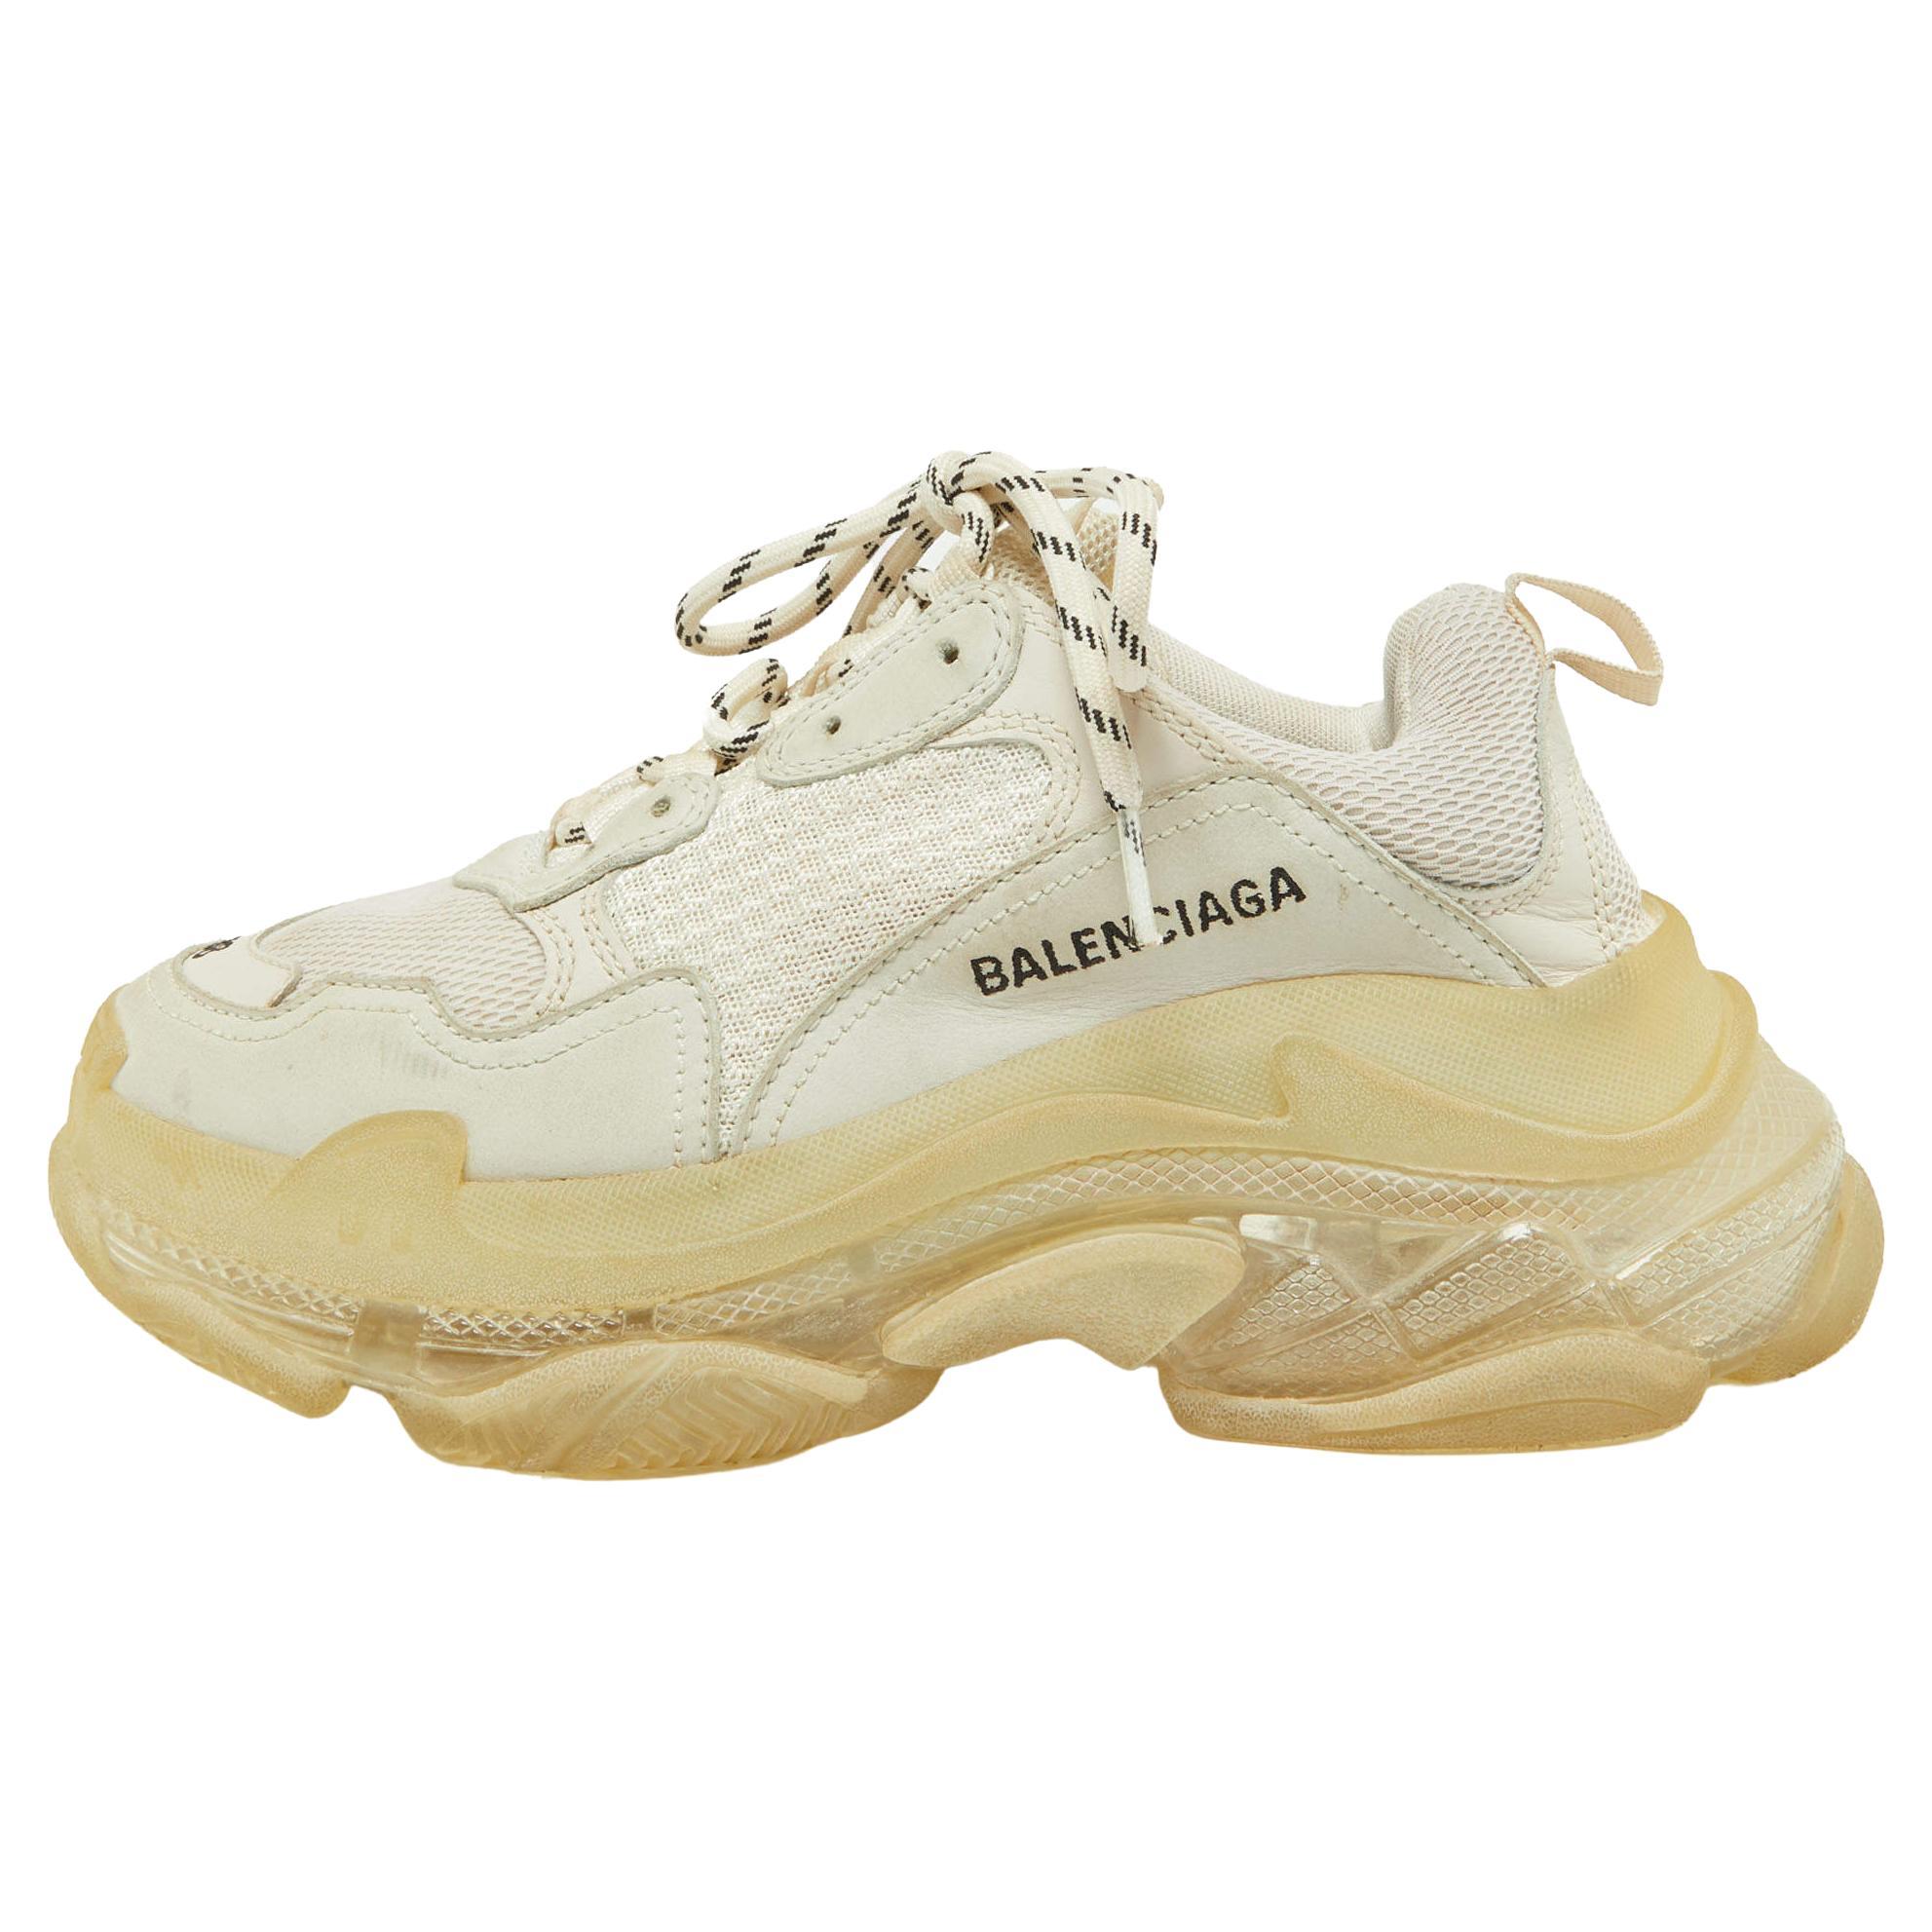 Balenciaga Two Tone Leather and Mesh Triple S Clear Sneakers Size 38